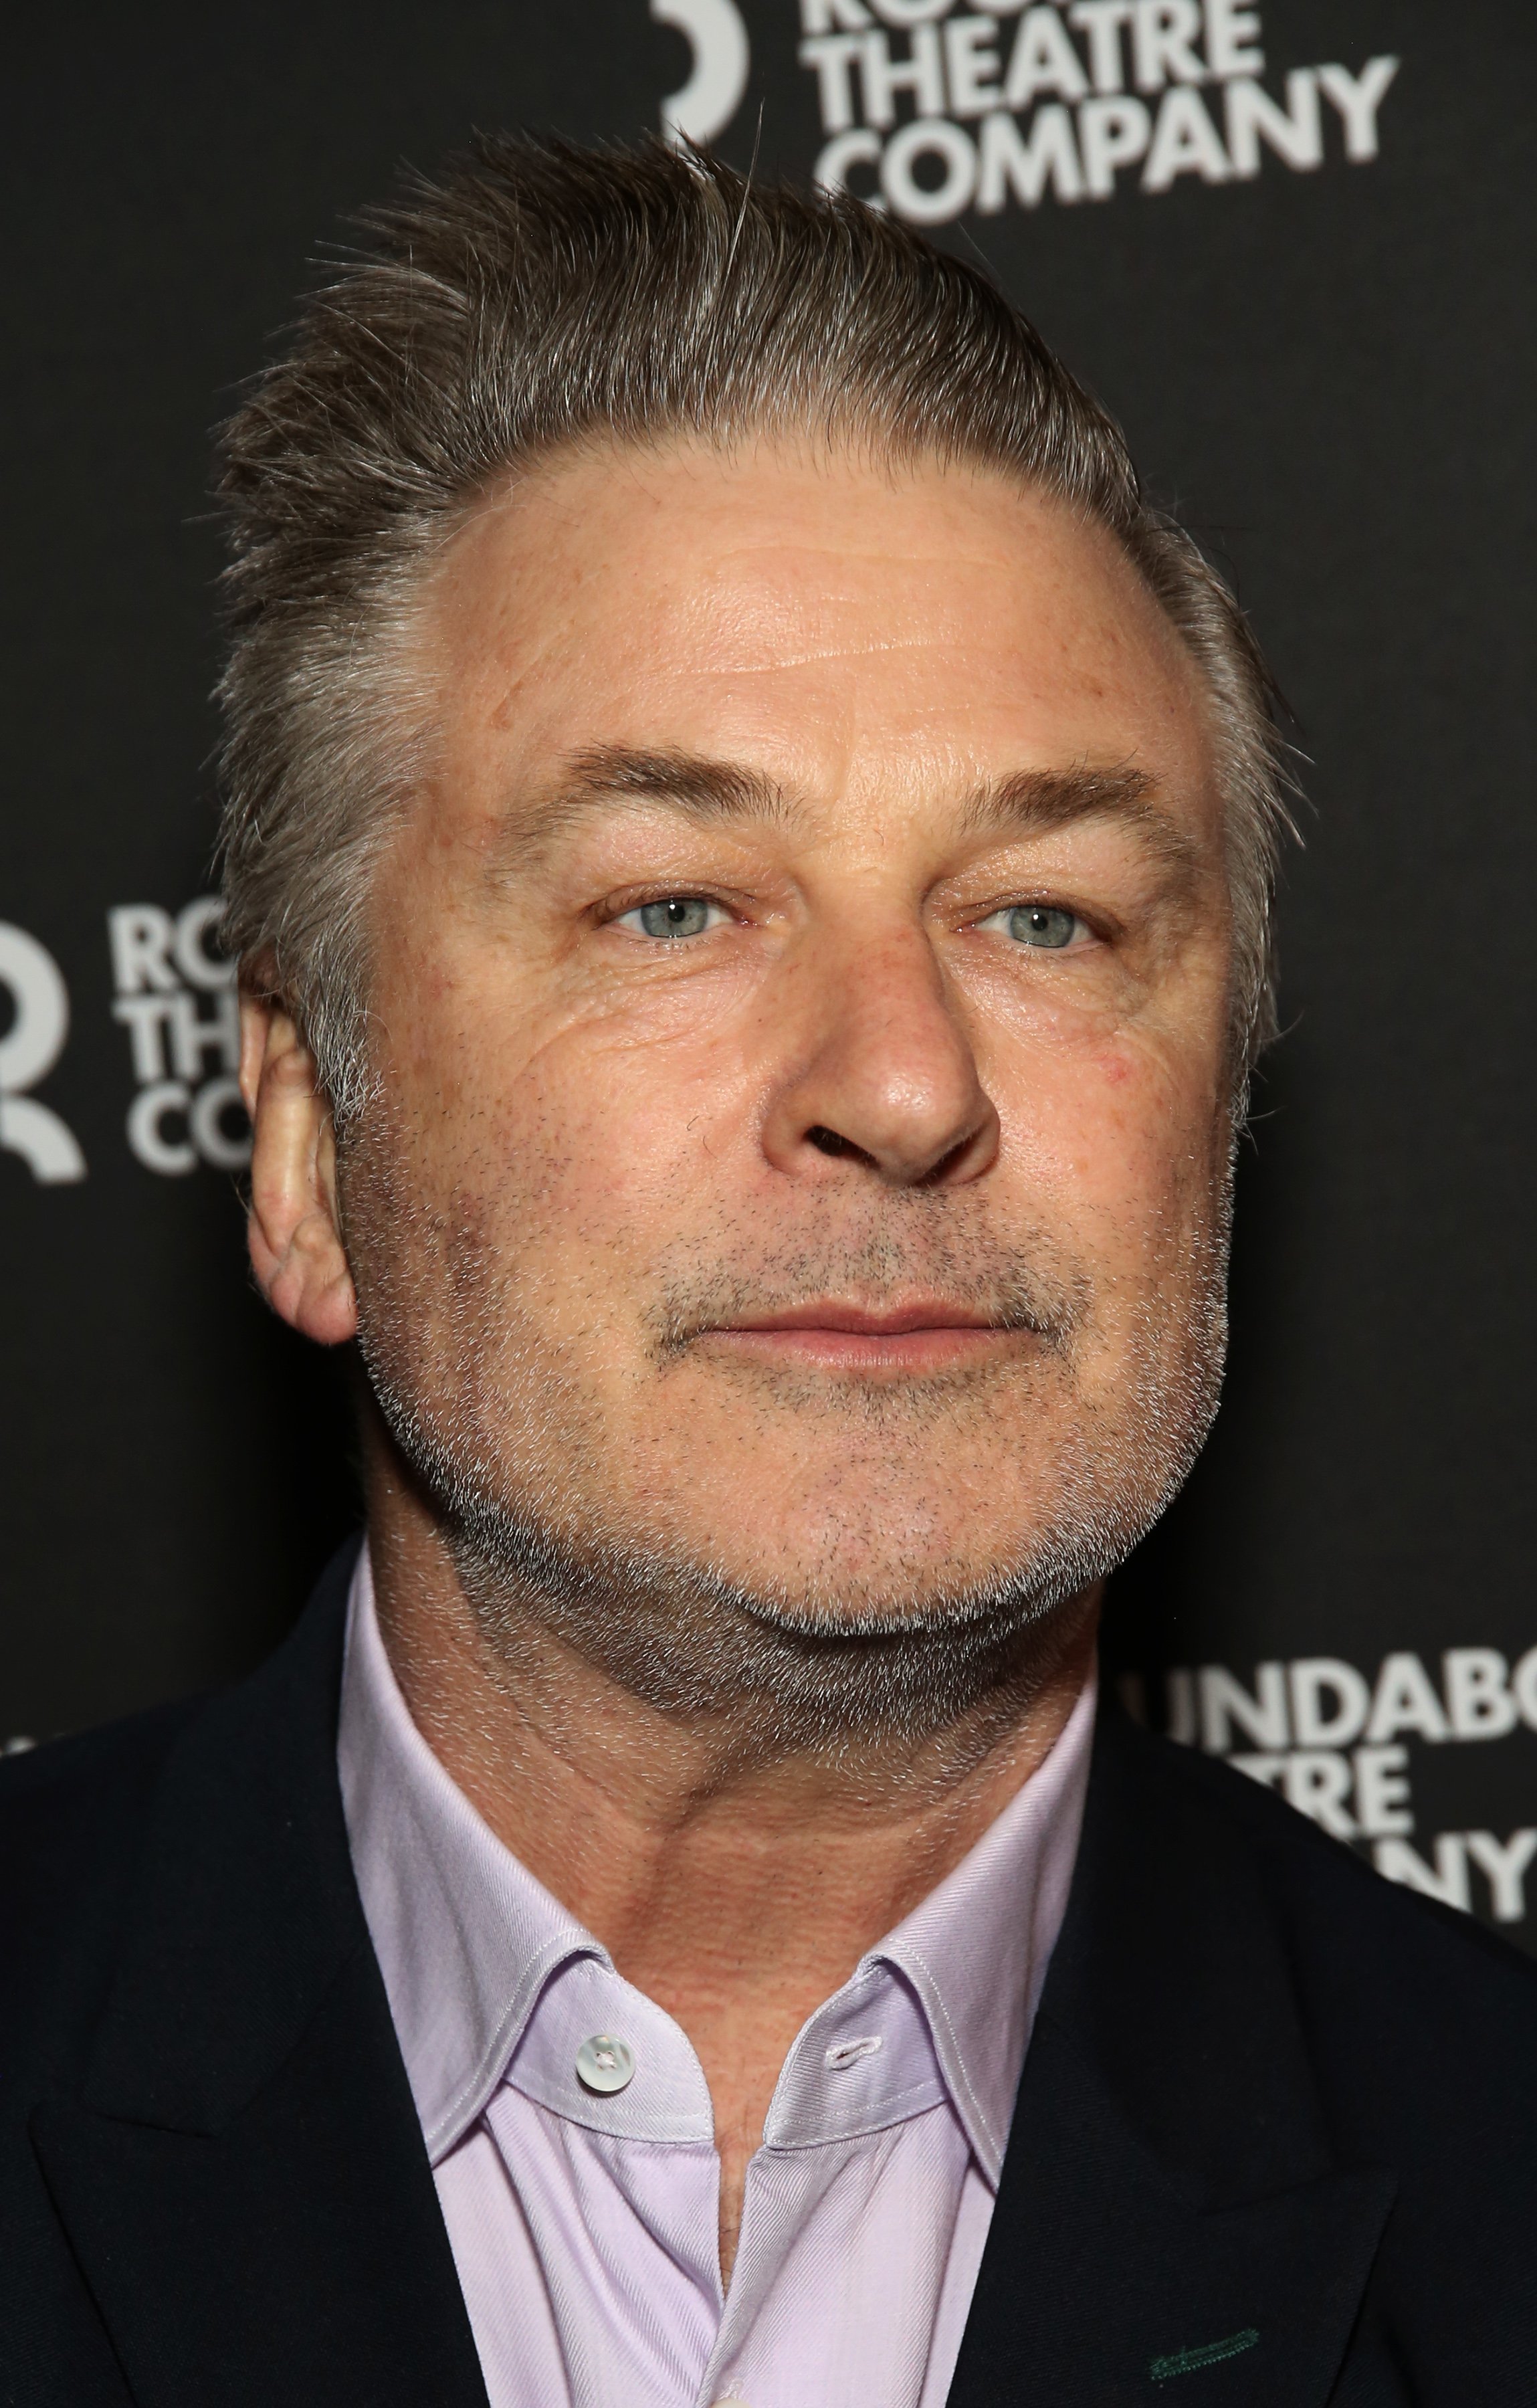 Alec Baldwin at the Broadway premiere of "Kiss Me, Kate" in New York City | Photo: Getty Images